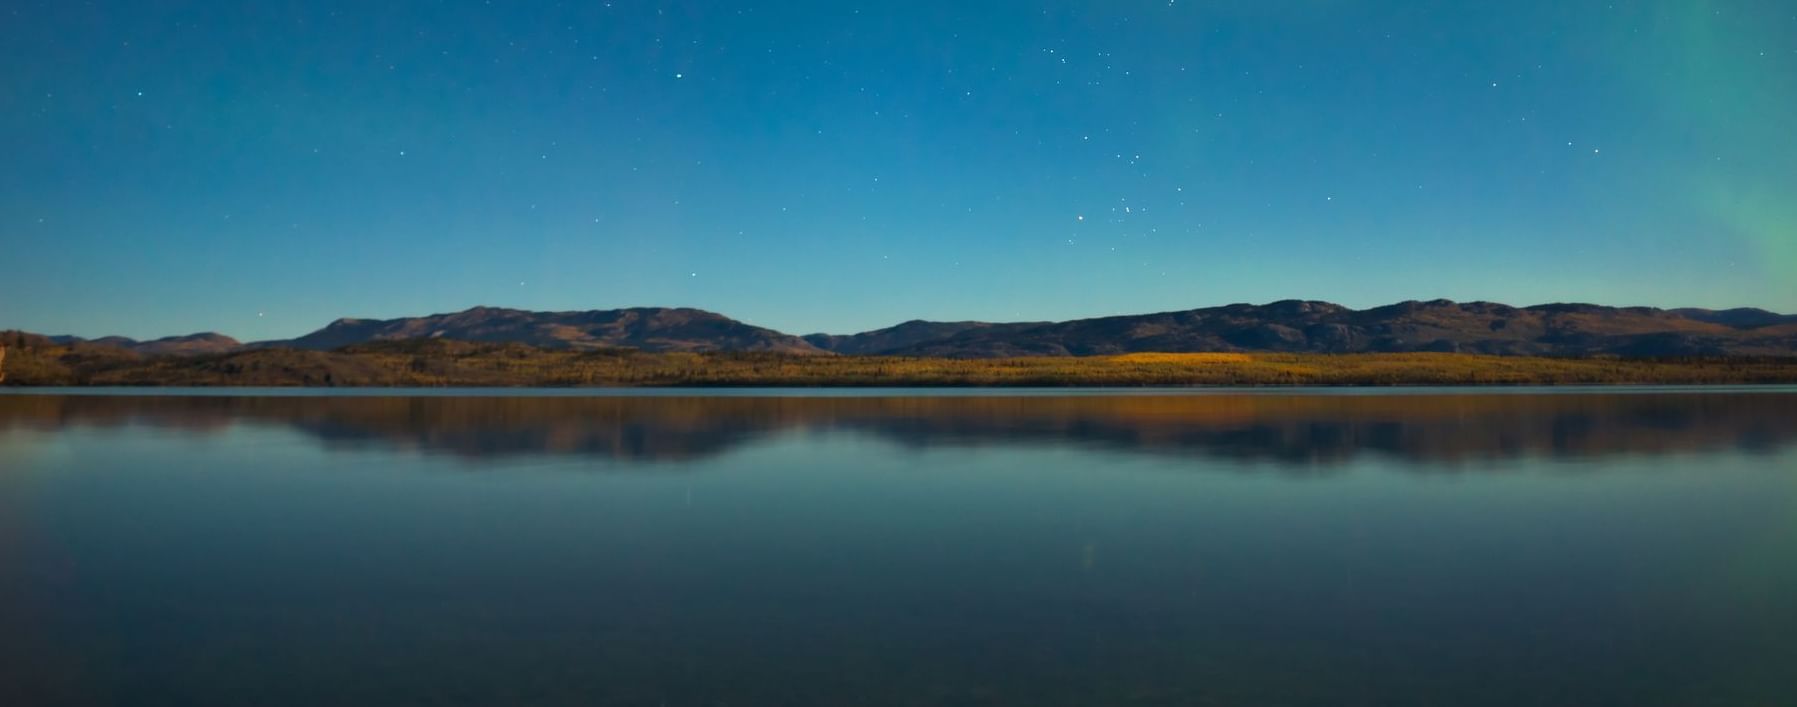 Lake surrounded by mountains with starry evening sky above